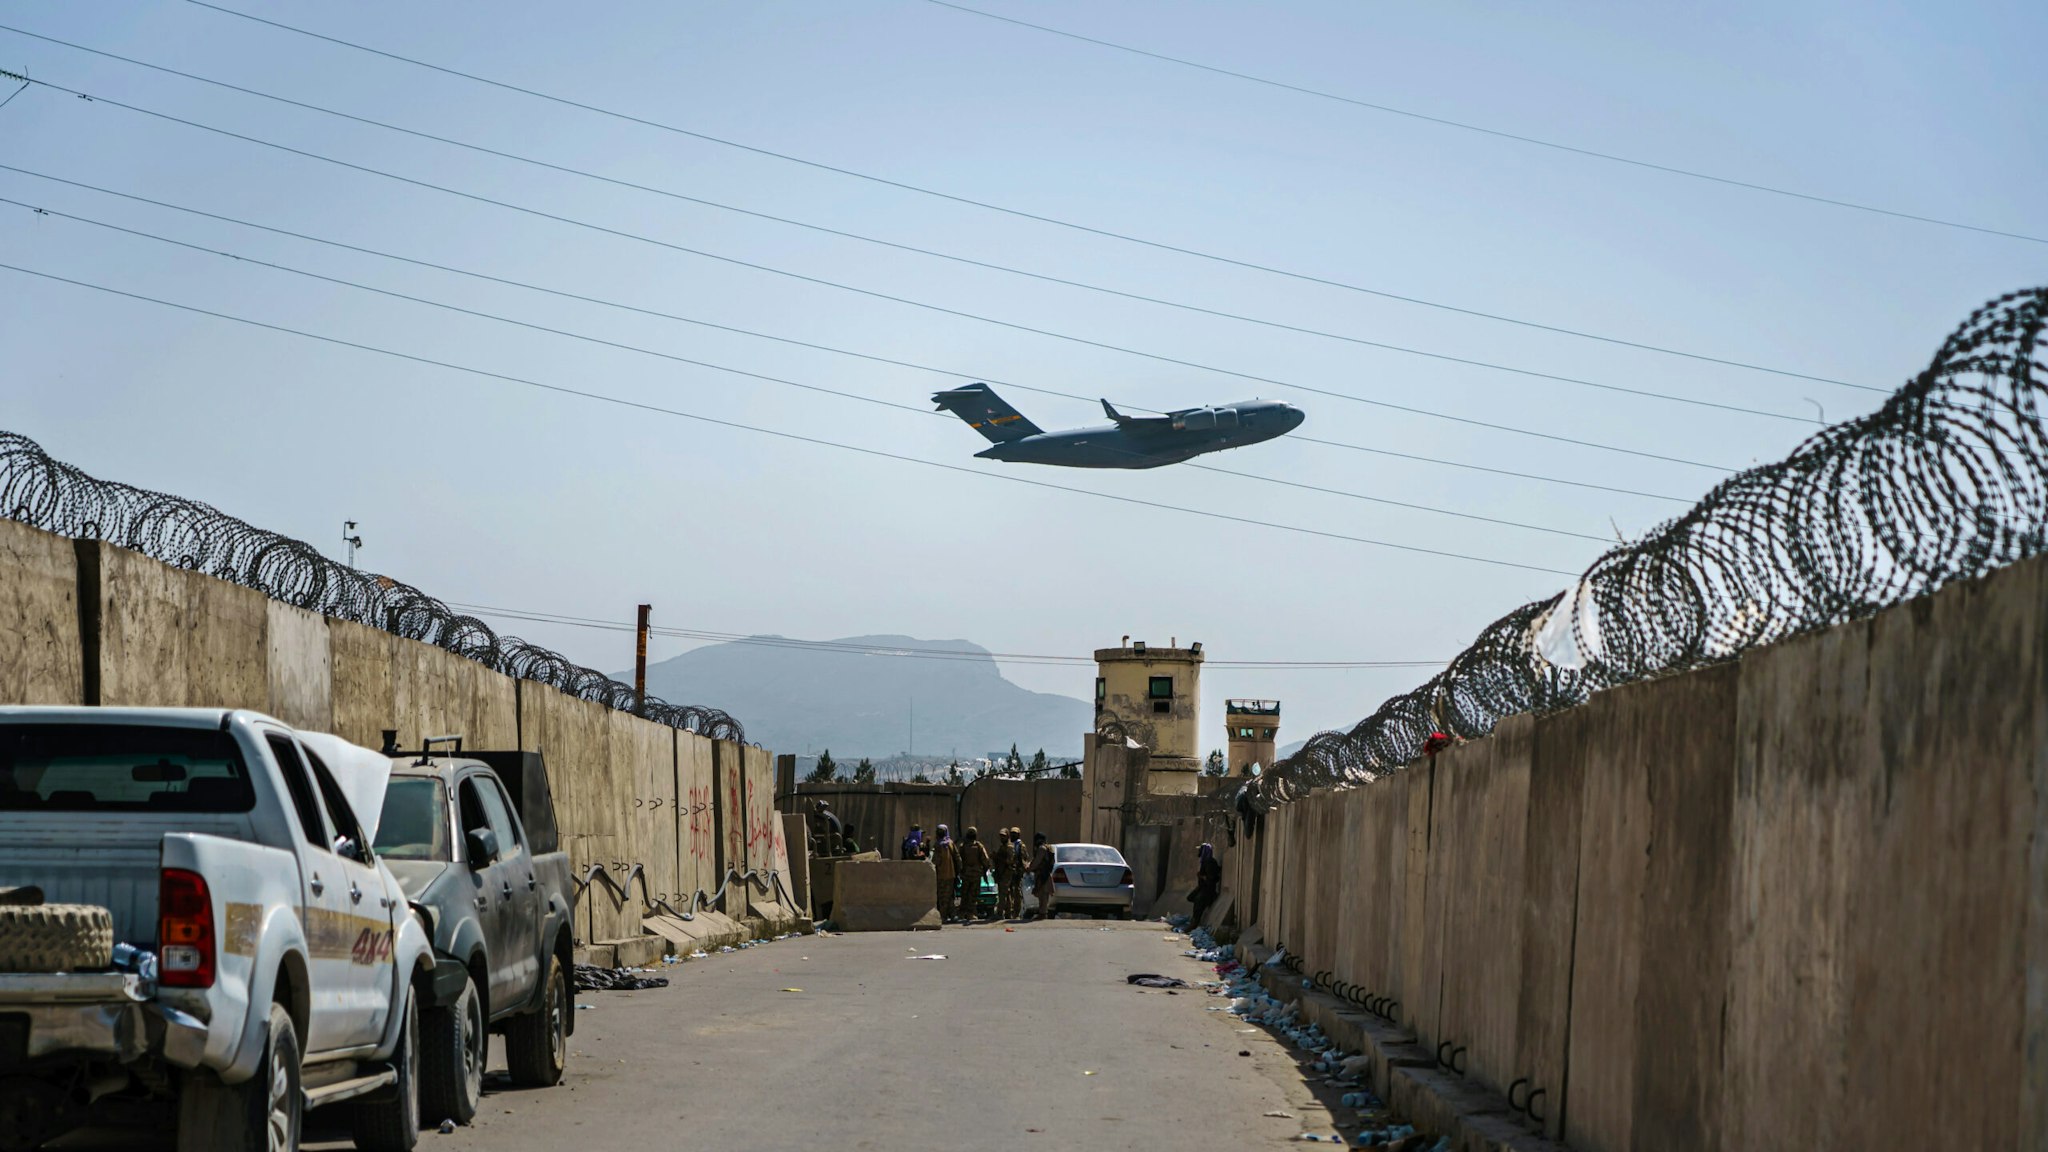 KABUL, AFGHANISTAN -- AUGUST 29, 2021: A C-17 Globemaster takes off as Taliban fighters secure the outer perimeter, alongside the American controlled side of of the Hamid Karzai International Airport in Kabul, Afghanistan, Sunday, Aug. 29, 2021.